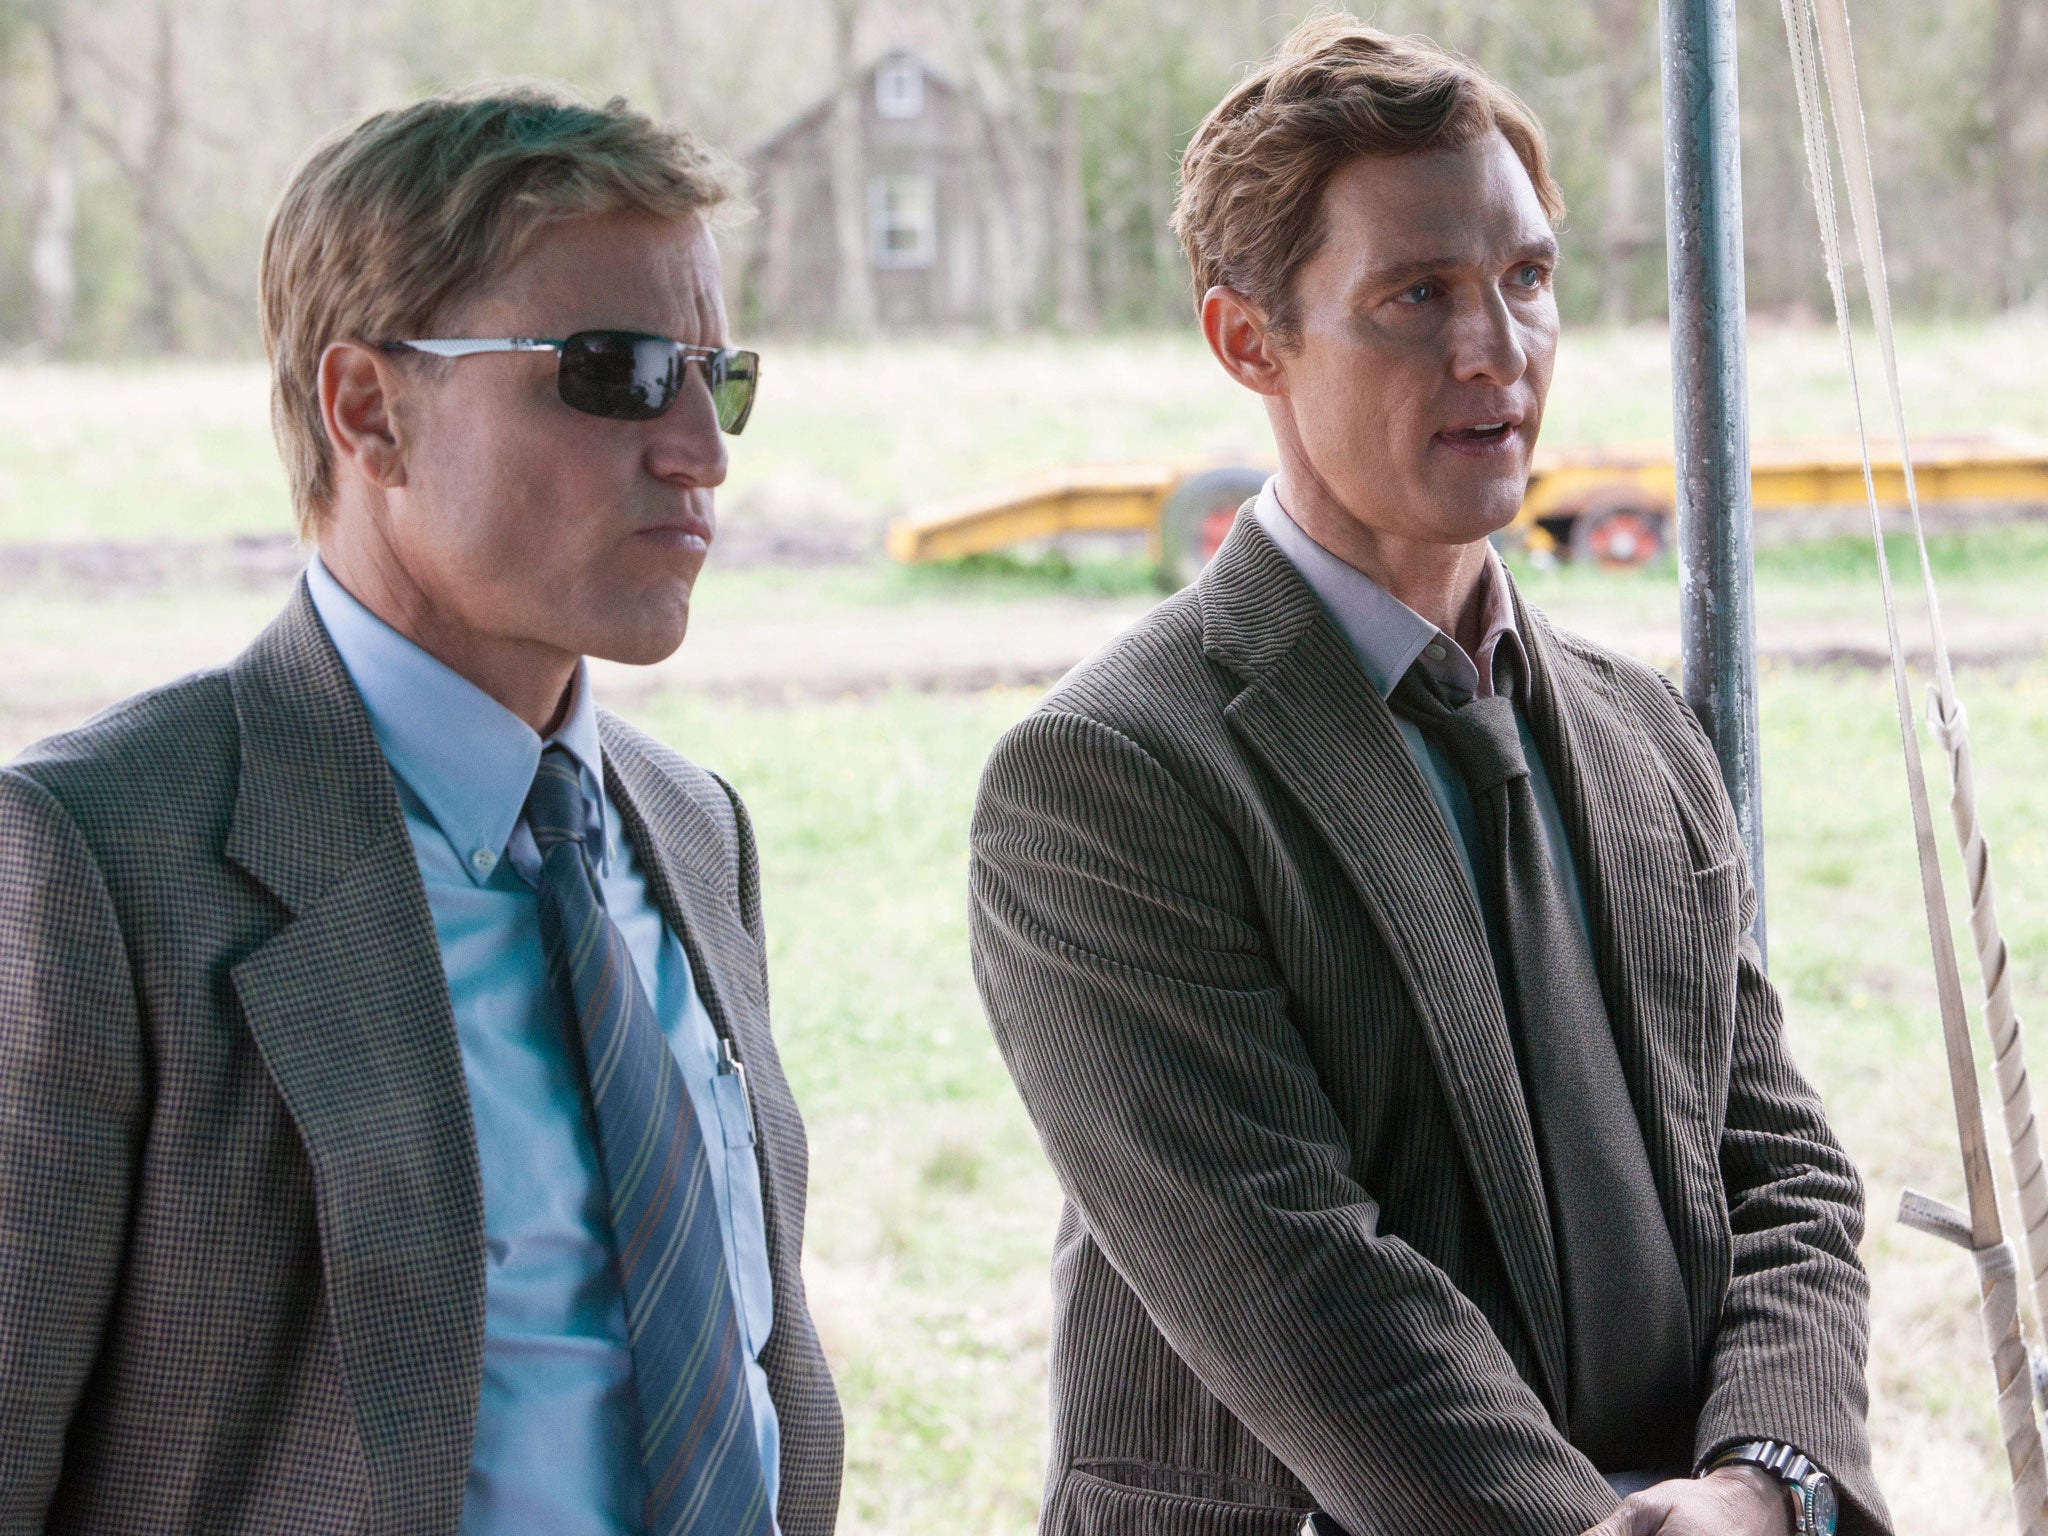 Rust cohle and marty фото 73